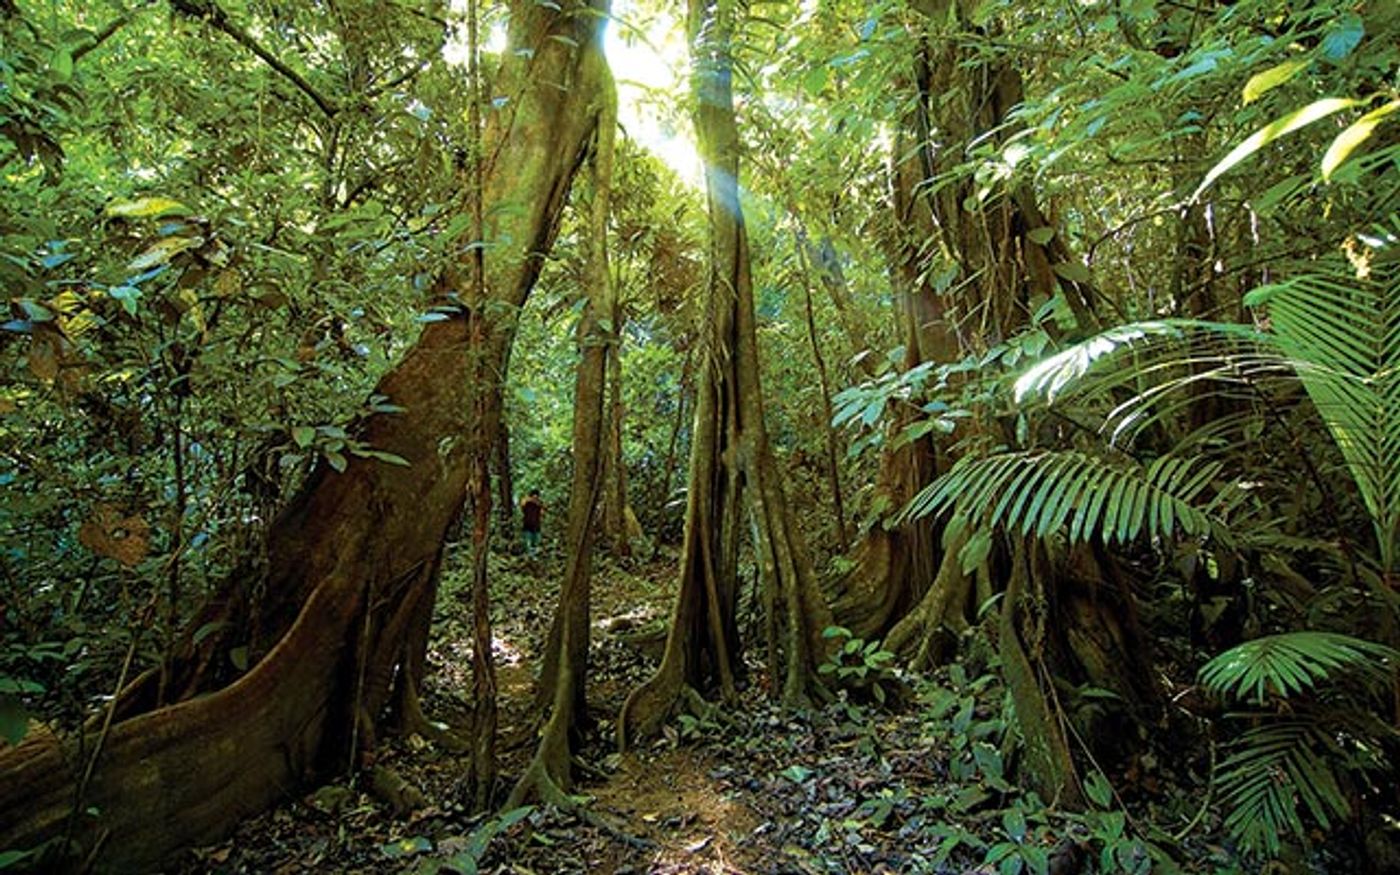 Carbon capture technologies aim to mimic the ecological services of trees. Photo: The Nature Conservancy